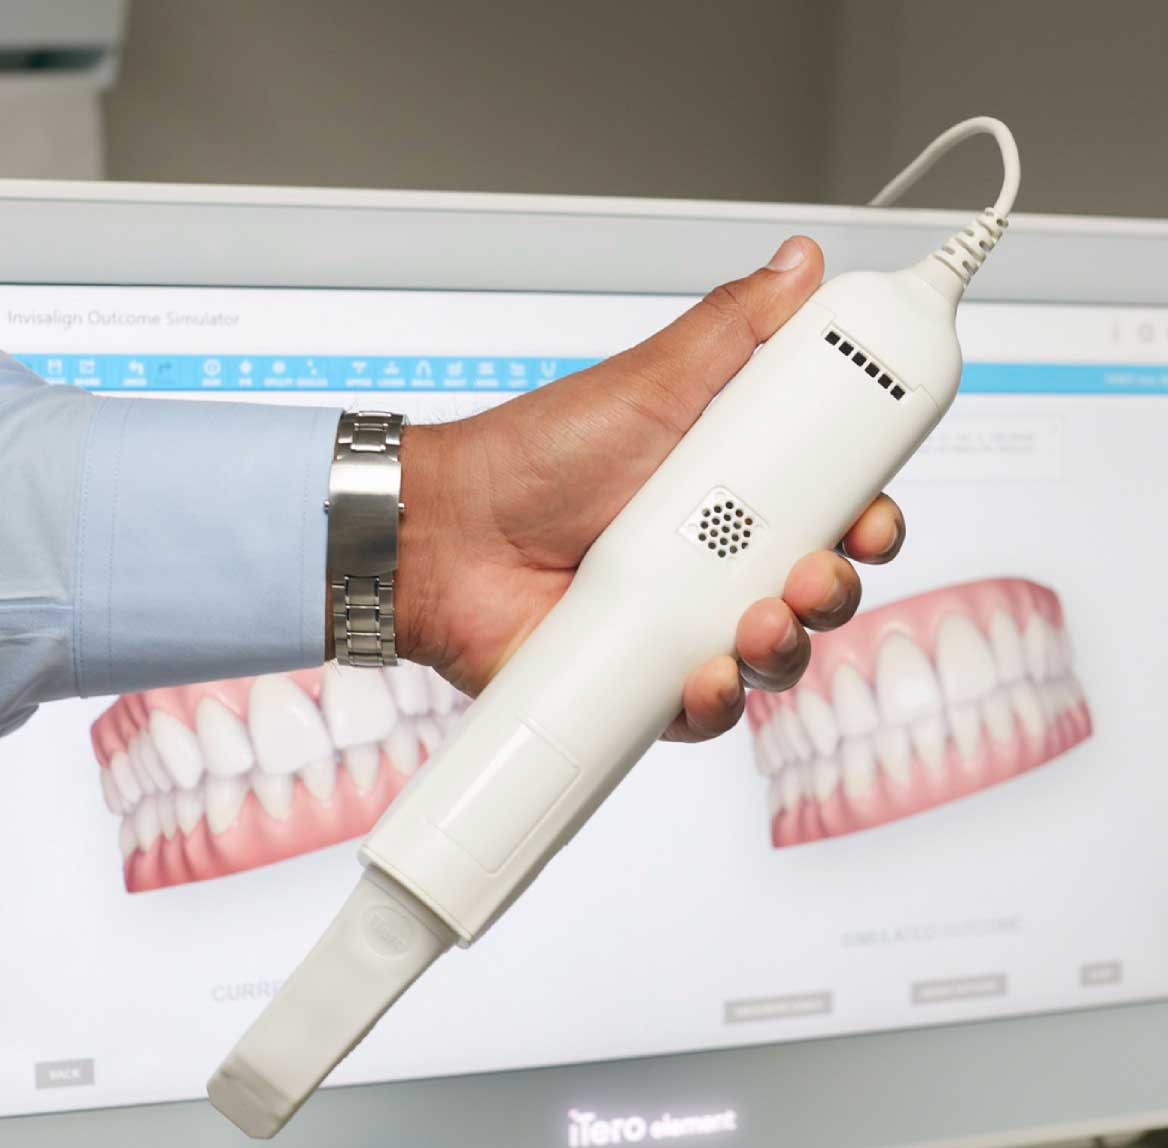 Itero scanner to boost your practice - Invisalign Europe